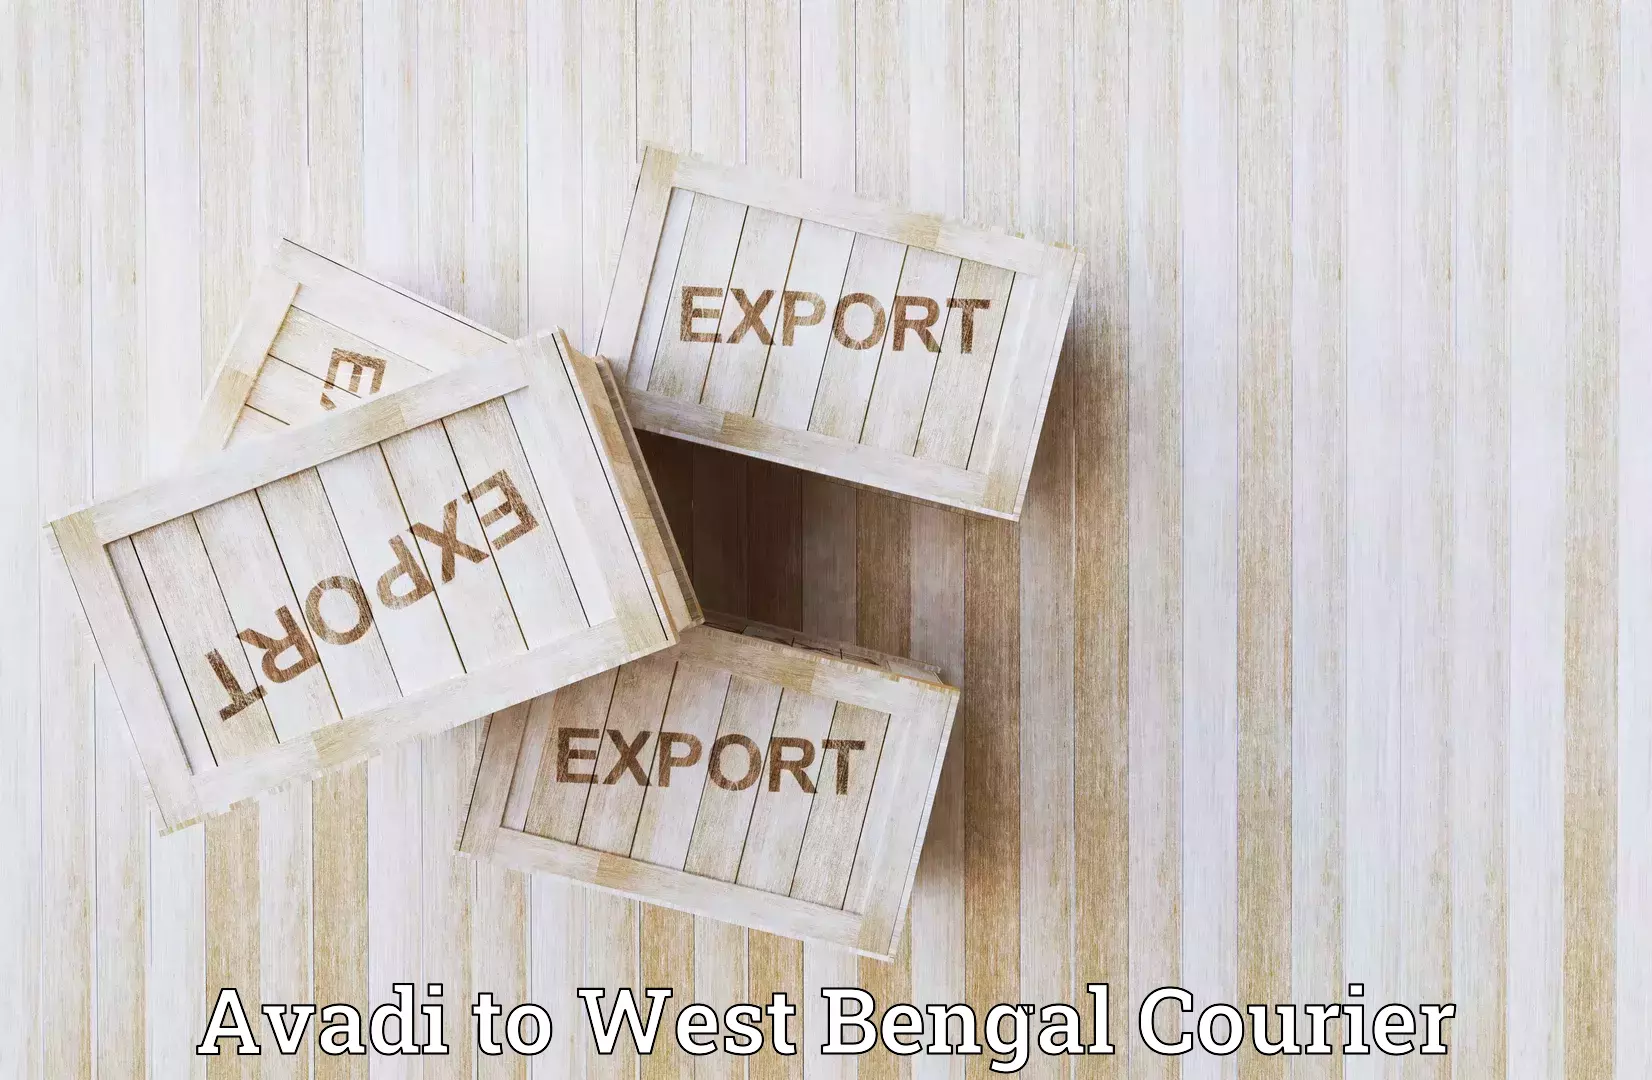 Delivery service partnership Avadi to West Bengal